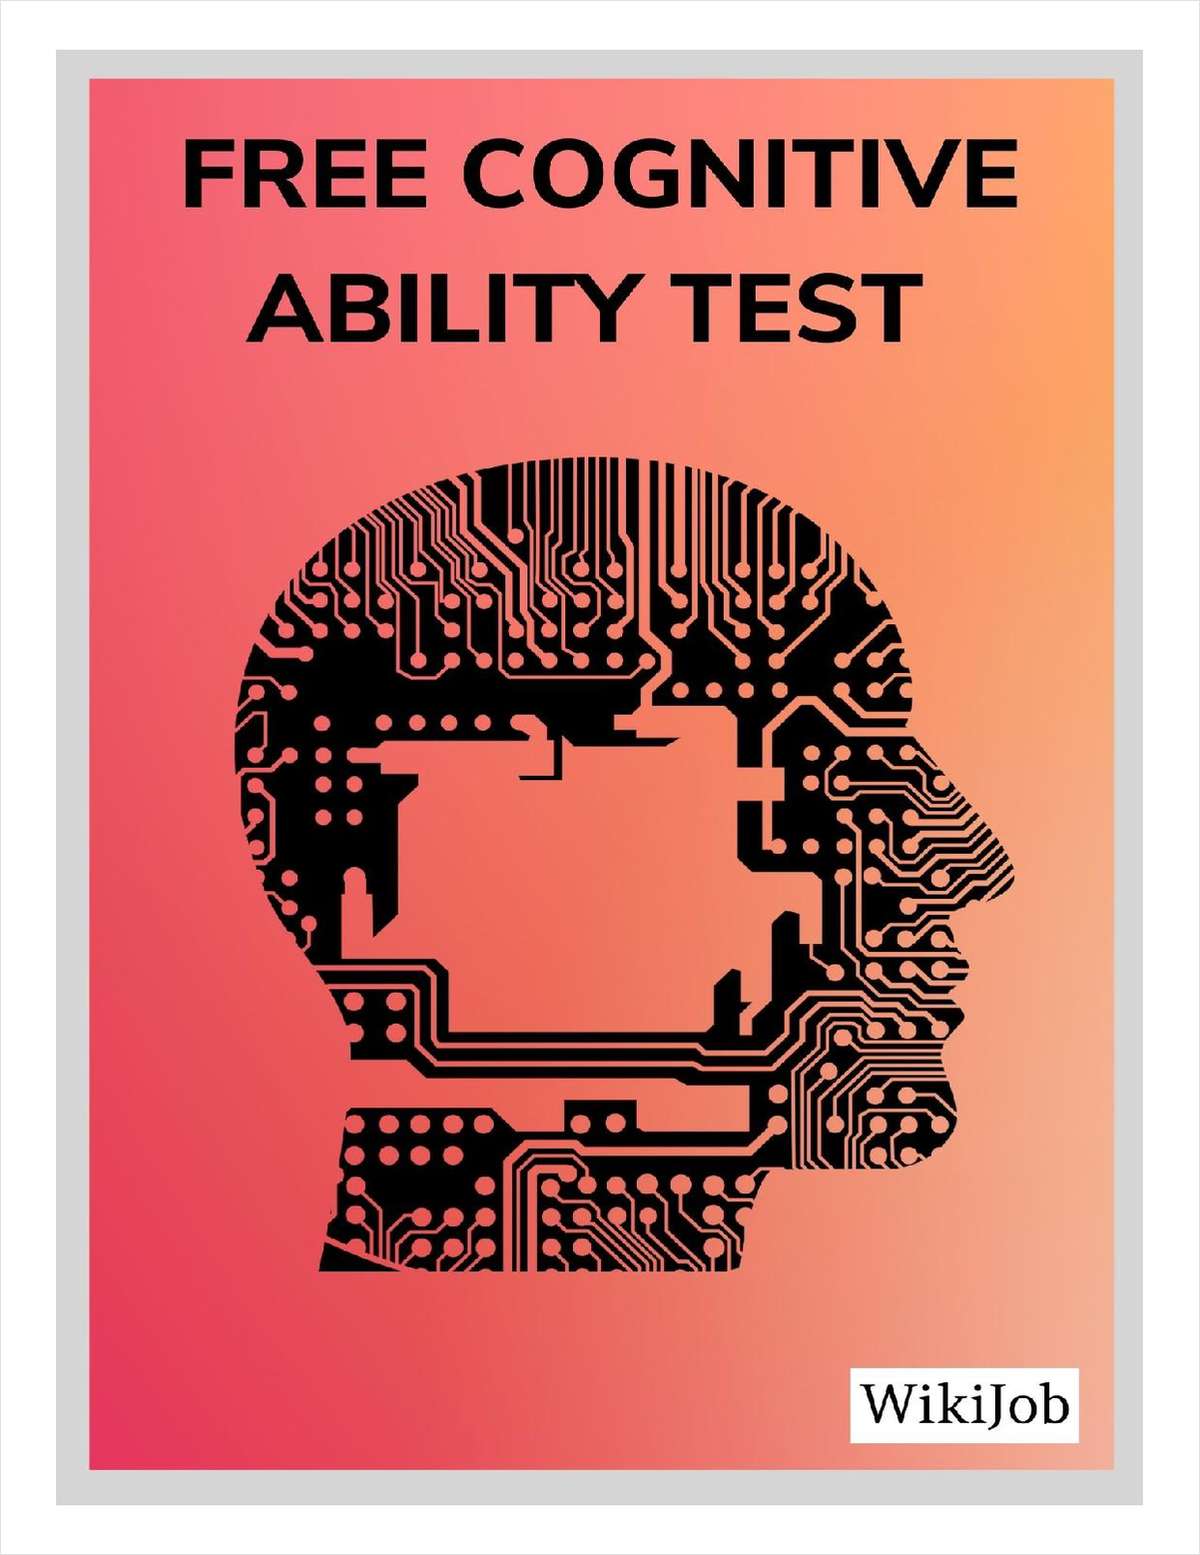 Free Cognitive Ability Test